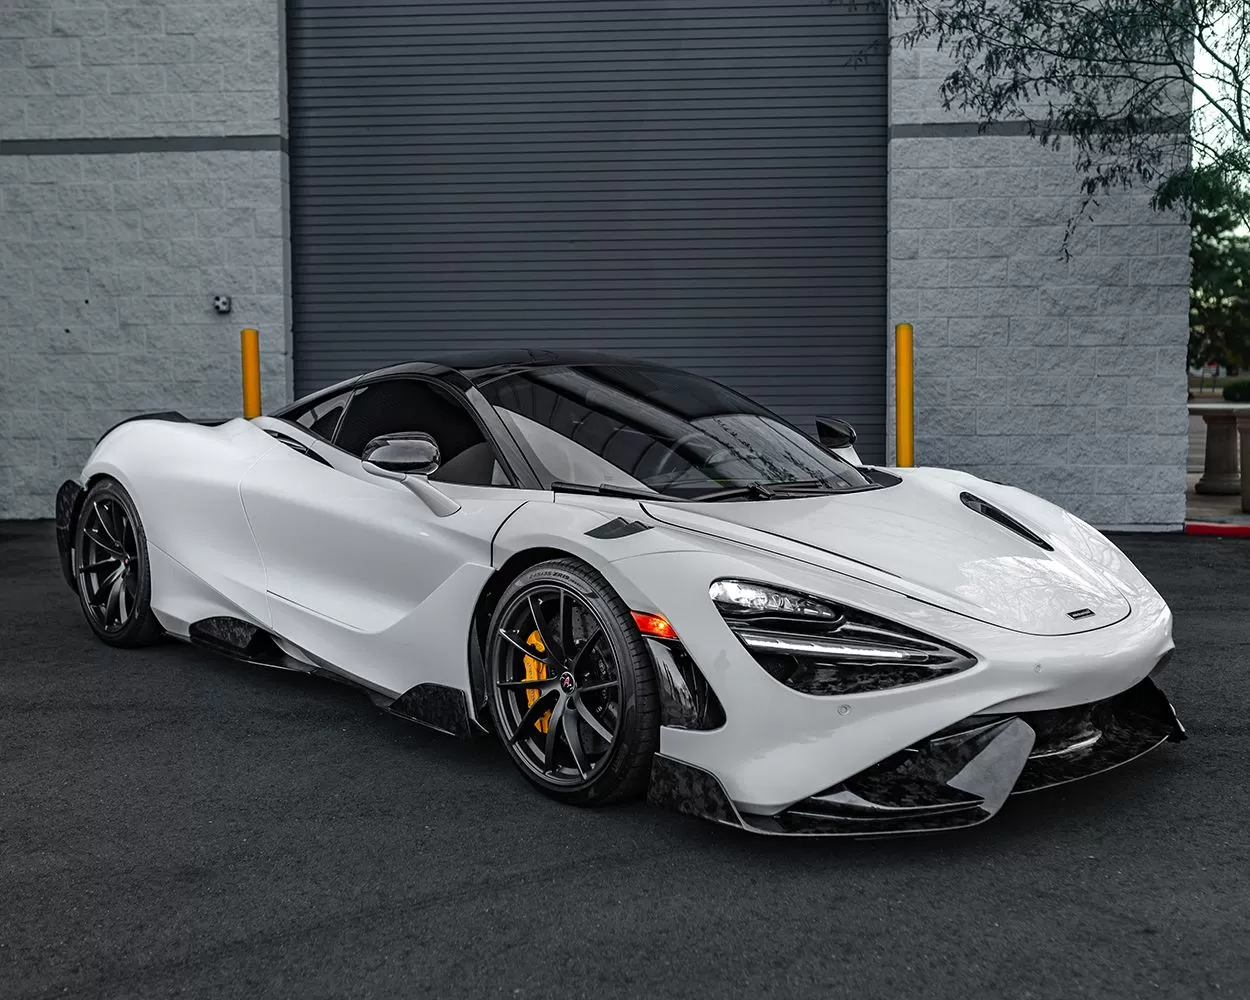 VR Aero Forged Carbon McLaren 720s Complete Body Kit - VR-720S-950